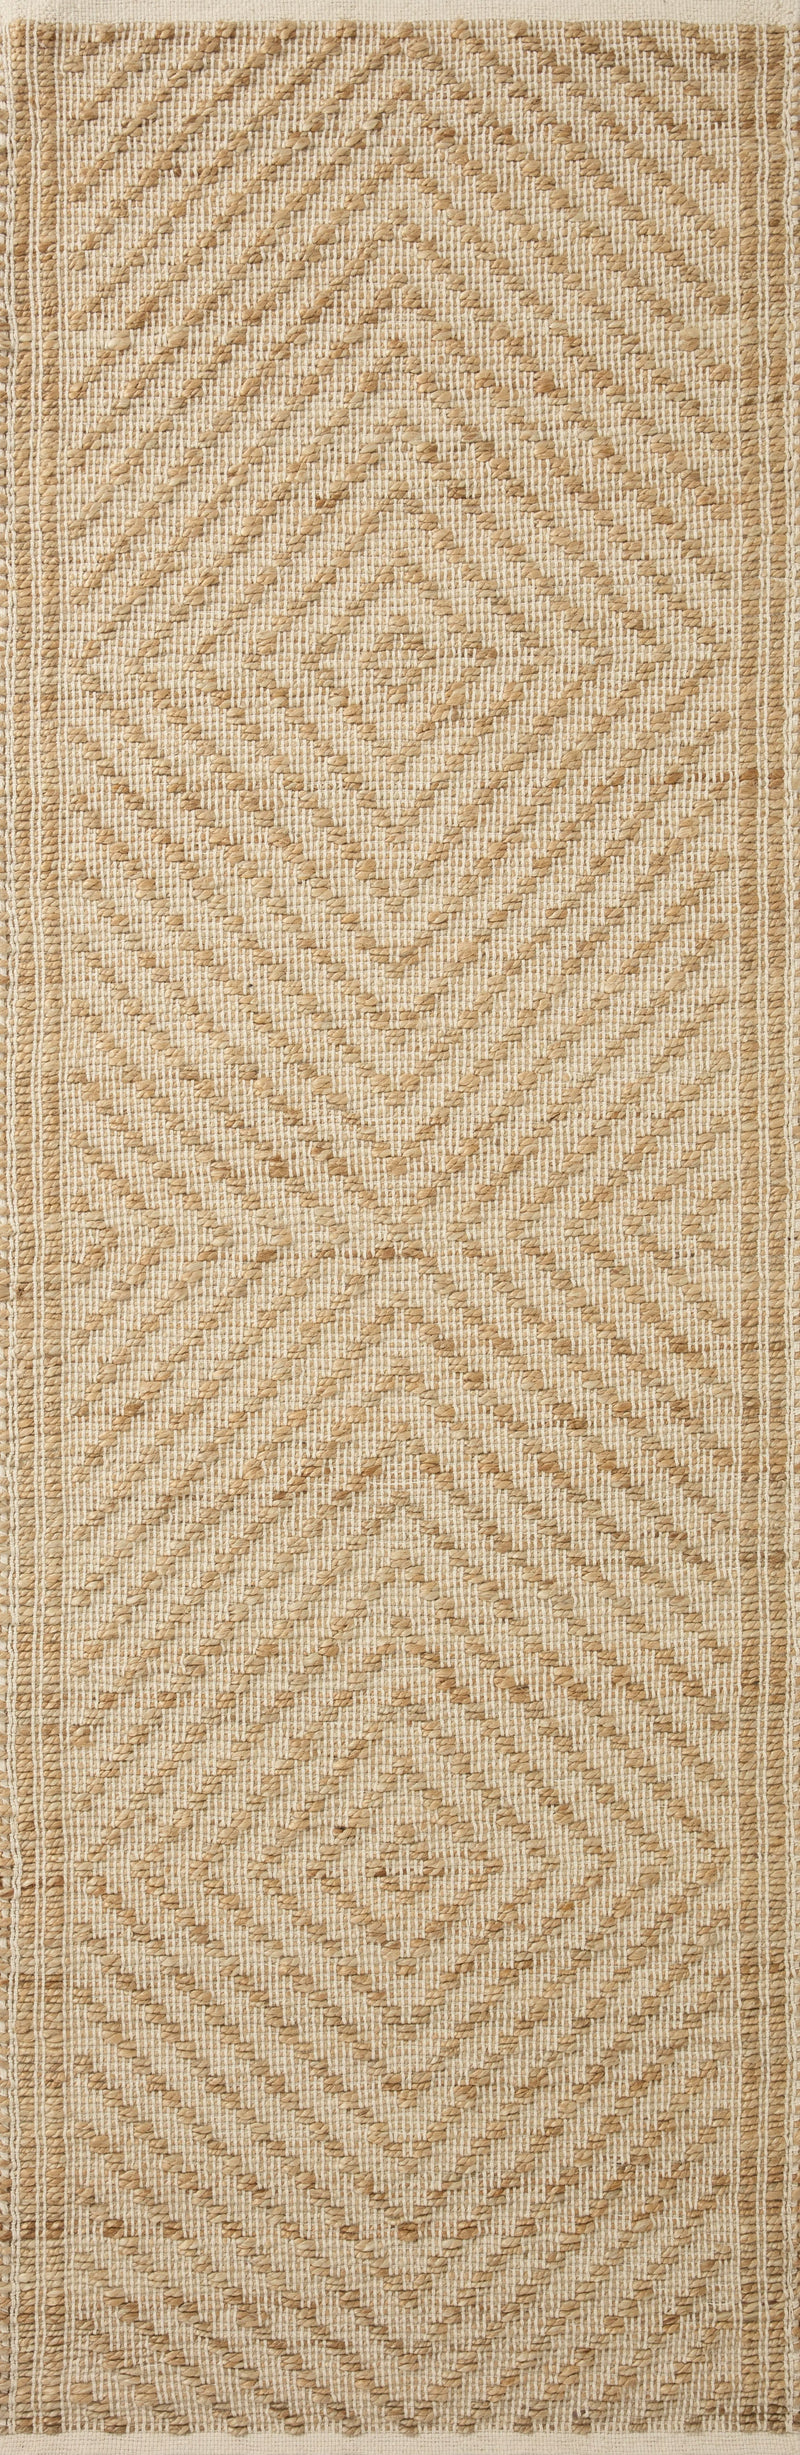 media image for colton hand woven natural ivory rug by angela rose x loloi colocon 04naiv2030 2 241